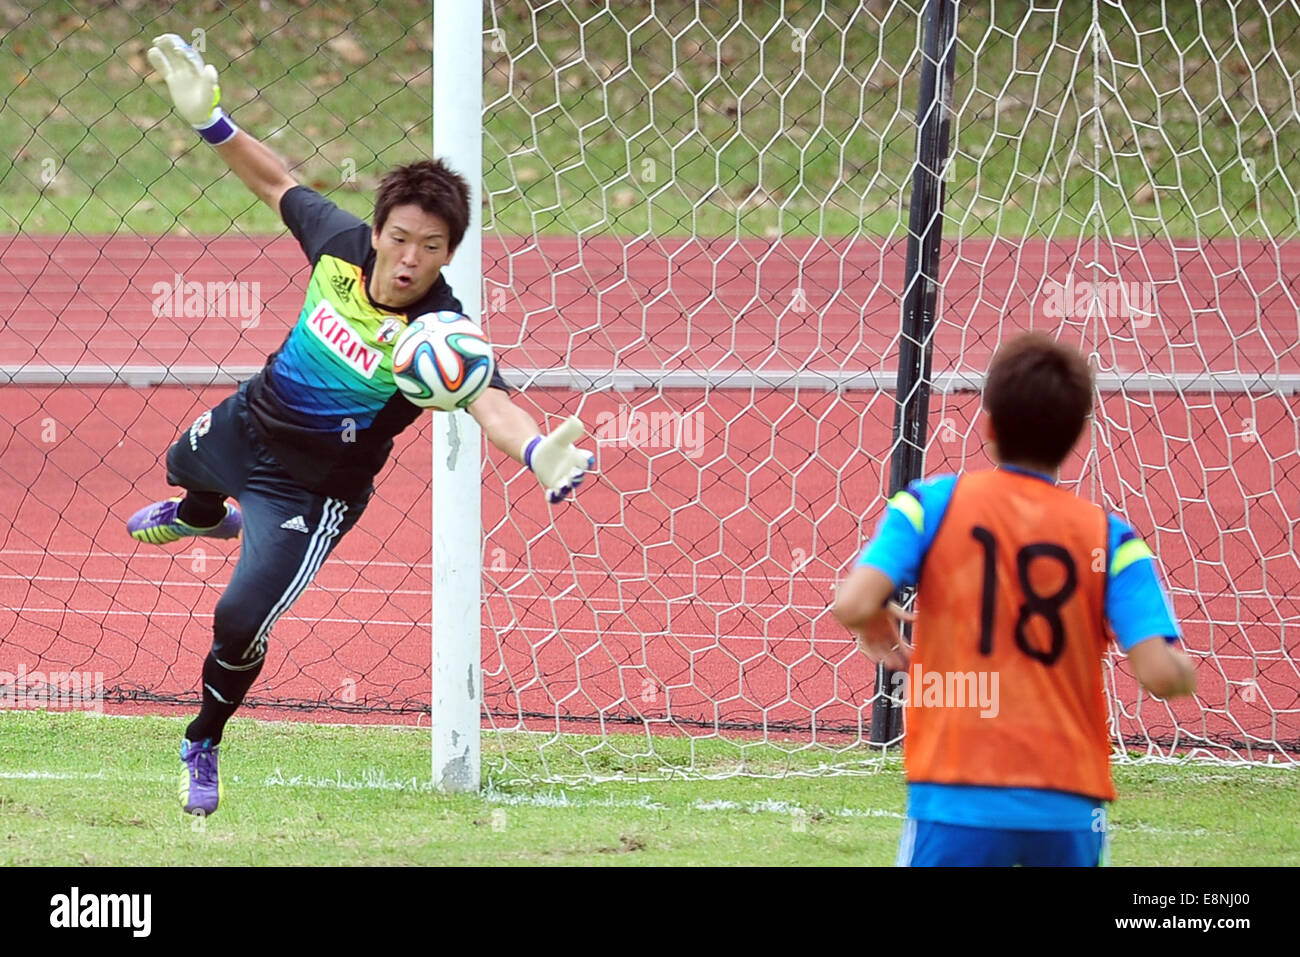 Singapore. 12th Oct, 2014. Nishikawa Shusaku (L) of Japan's football team attends the training session at Singapore's Bishan Stadium in Singapore, on Oct. 12, 2014. Japan and Brazil will have a friendly game at Singapore's National Stadium on Oct. 14. © Then Chih Wey/Xinhua/Alamy Live News Stock Photo